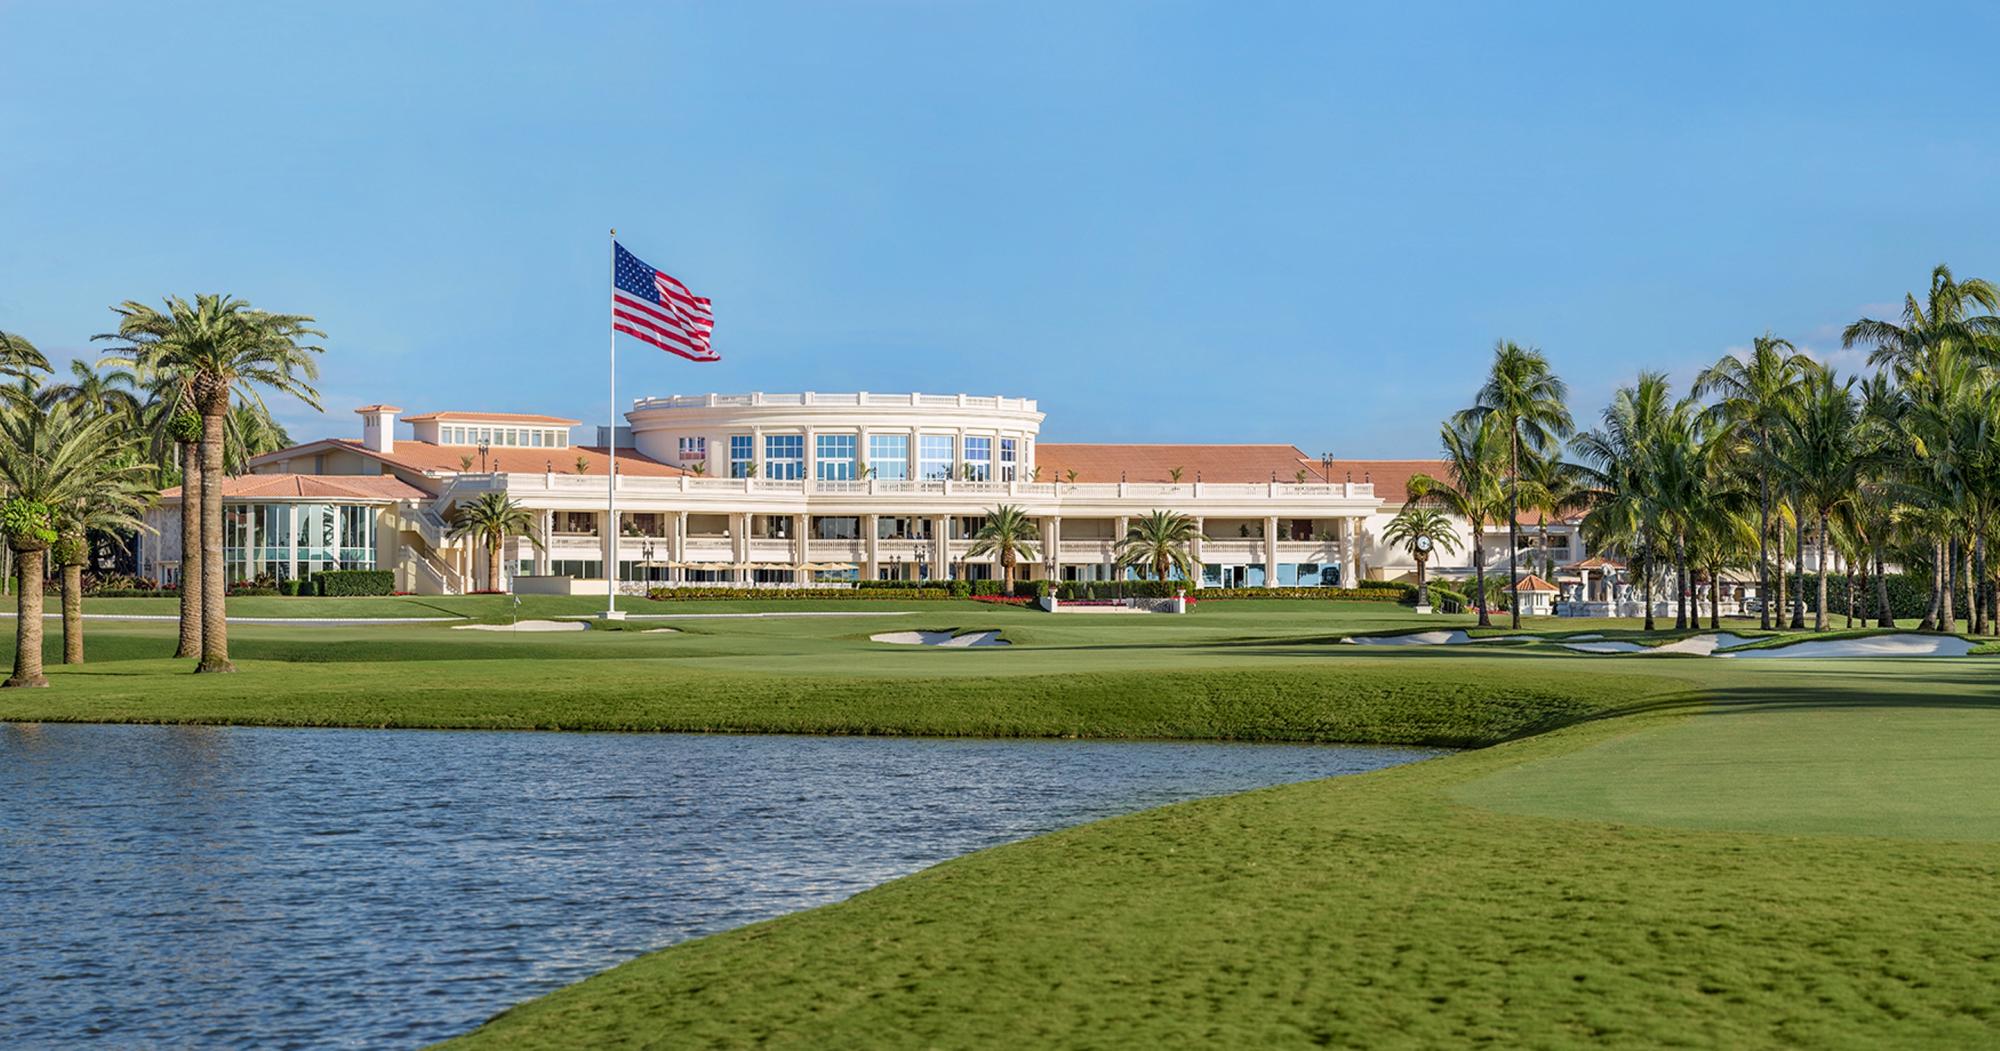 Trump National Doral Miami Golf hosts among the leading golf course near Florida